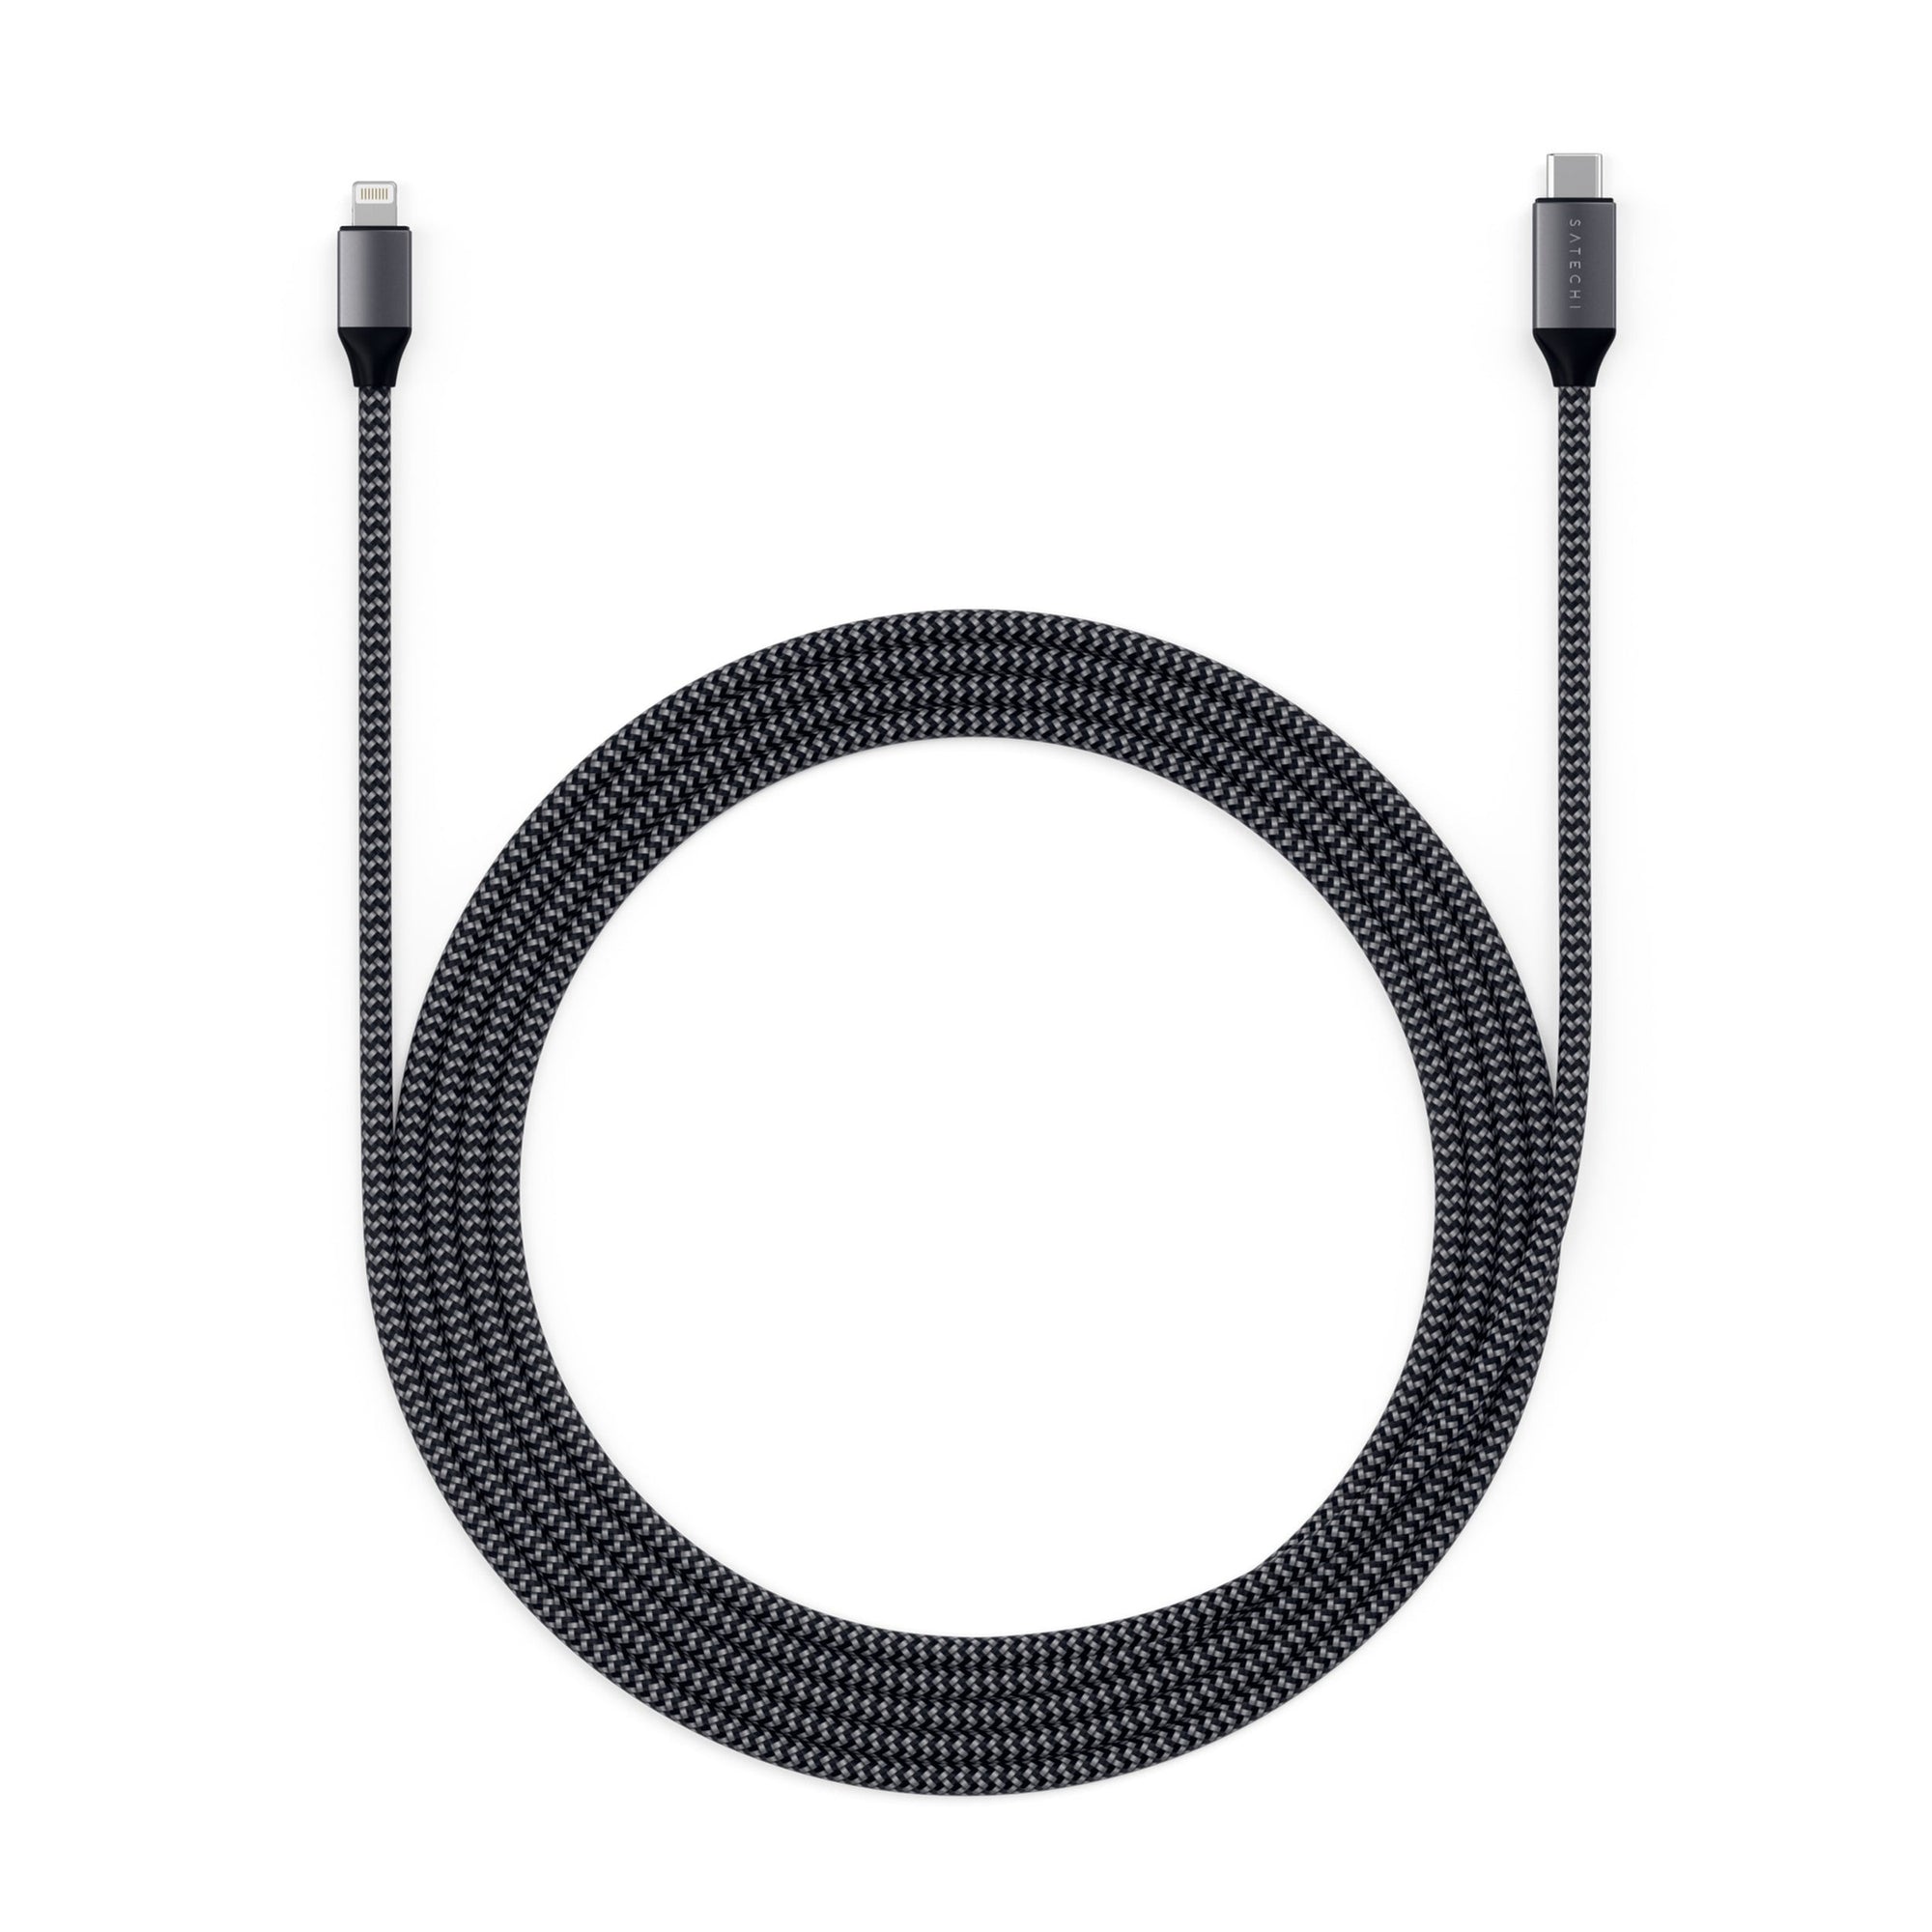 Cargador Belkin Pared Doble Usb + Cable Usb A Micro Usb – HardSoftpc